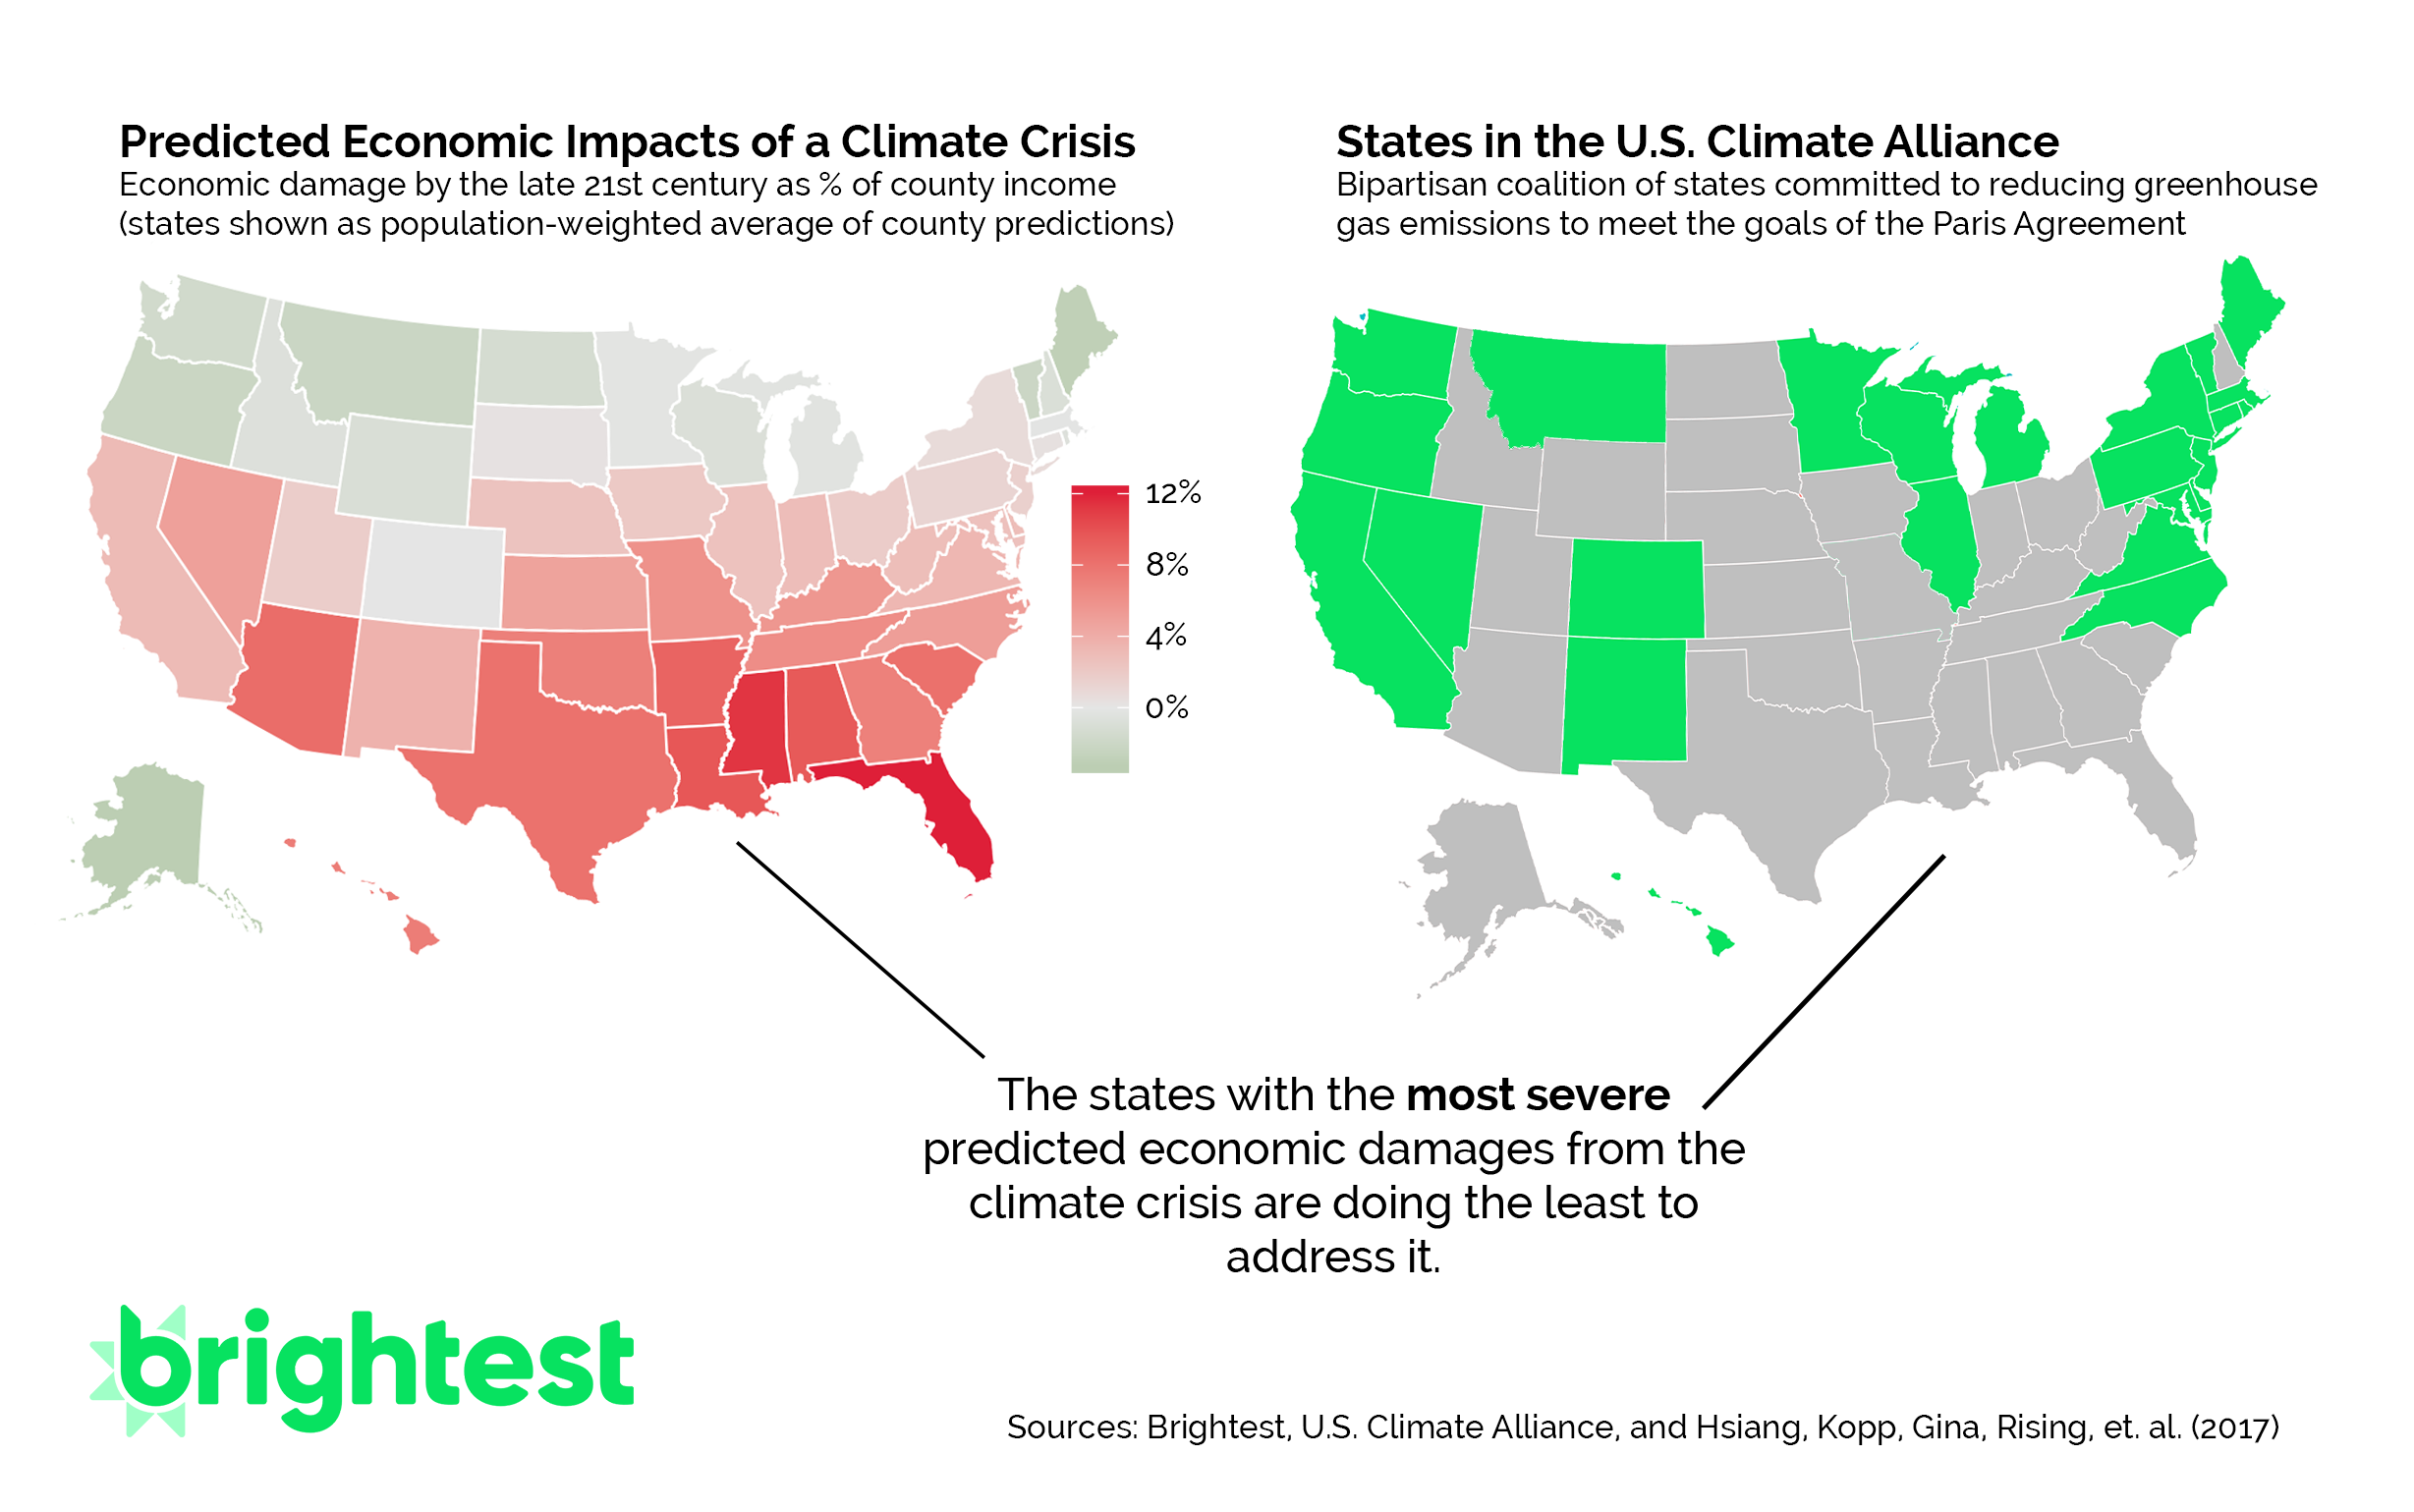 Comparison of members of the Climate Alliance and states that will be affected negatively by climate change